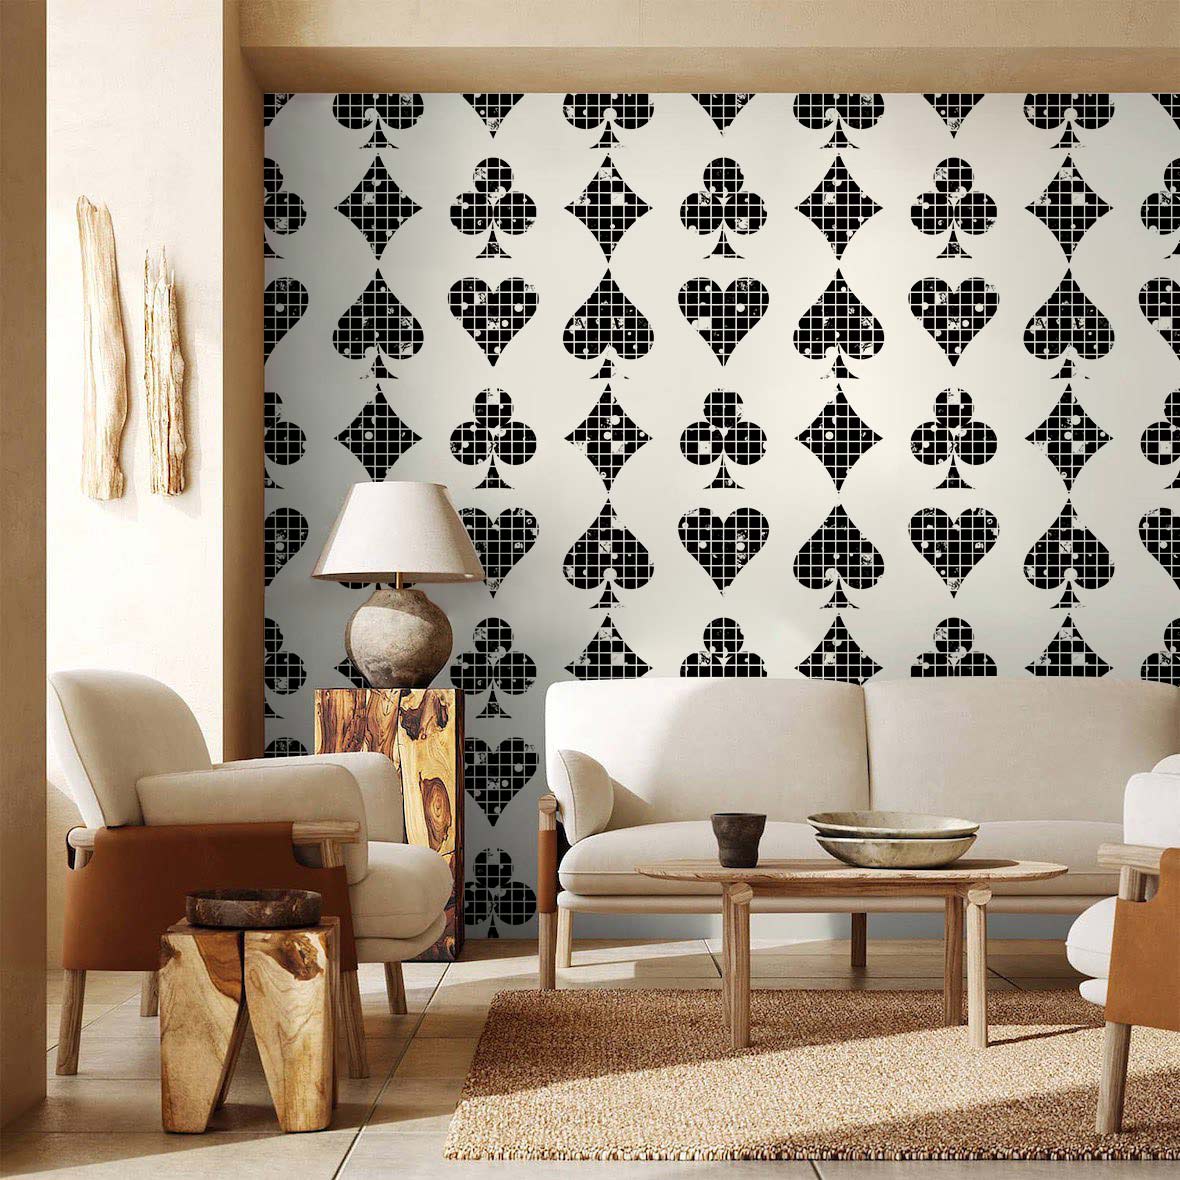 old and stylish grid poker wallpaper decorating